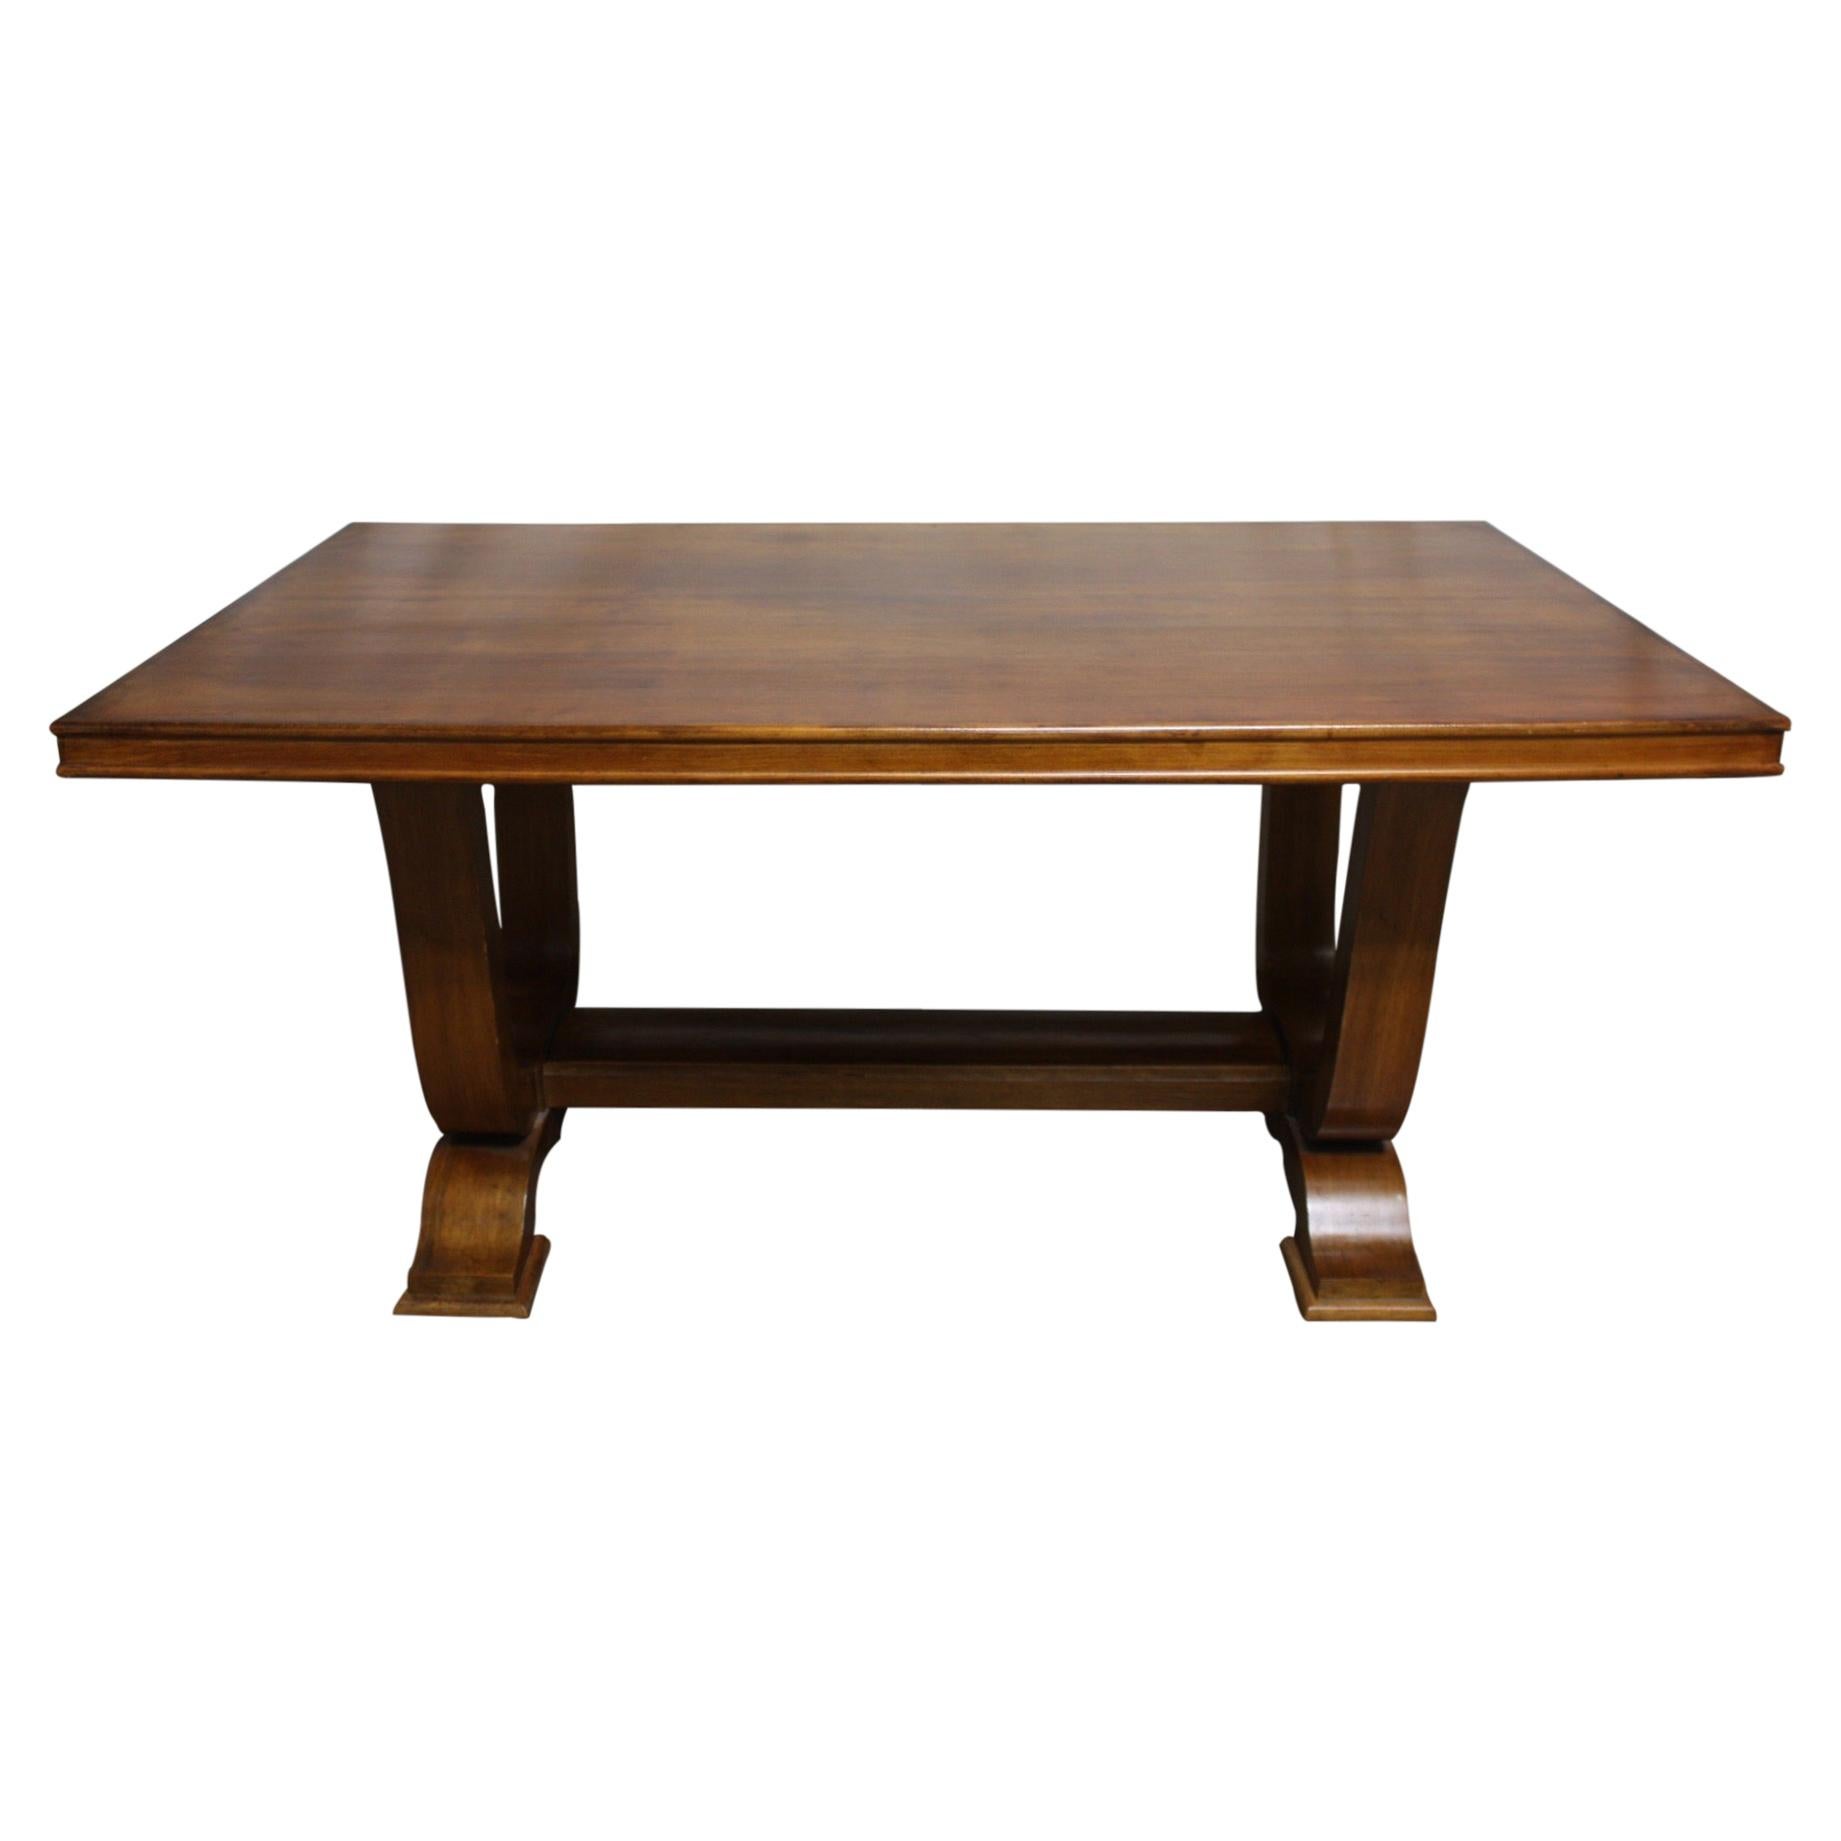 Mid-20th Century French Dining Table with 2 Extensions